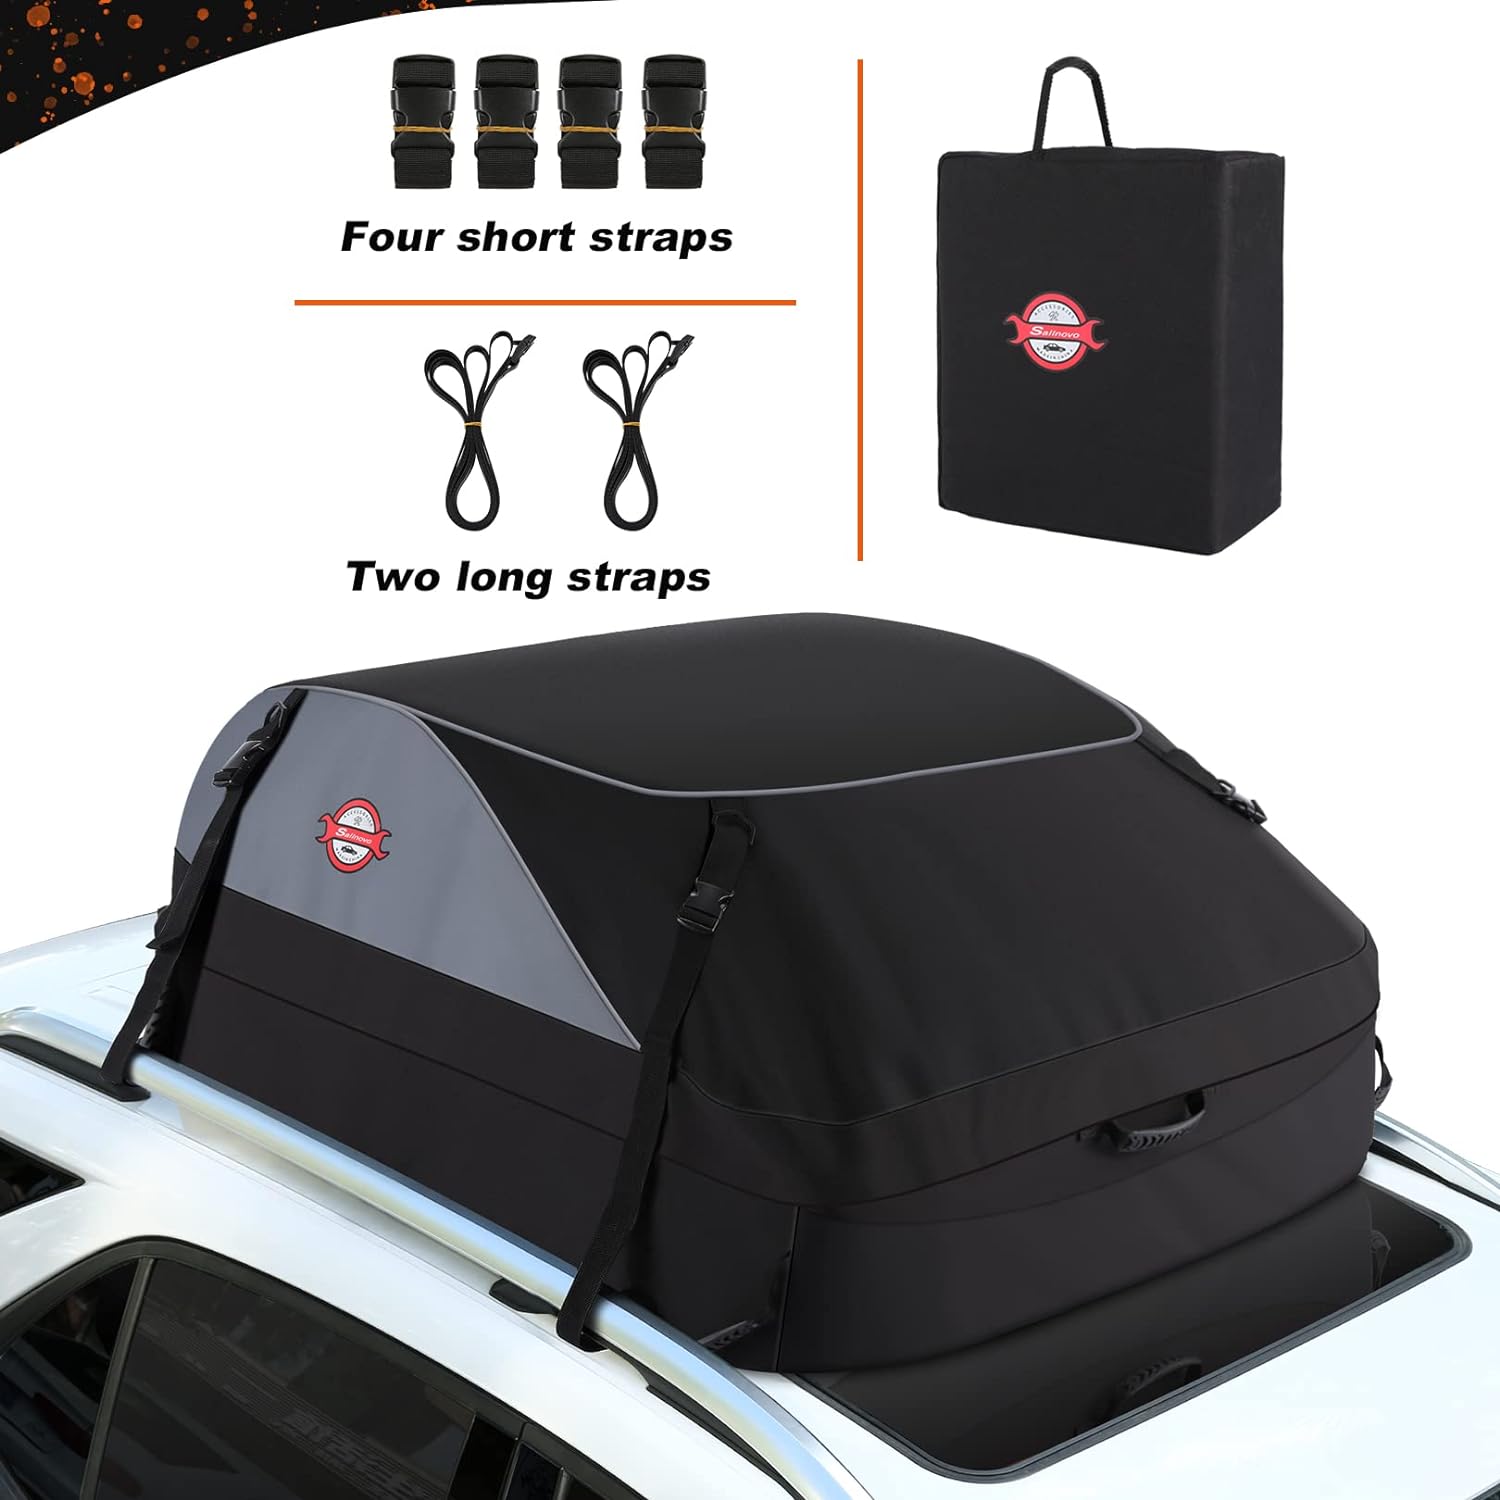 Adakiit Car Rooftop Cargo Carrier Bag, 15 Cubic Feet Waterproof Soft Roof Top Luggage Bag for All Vechicles SUV with/Without Racks - Wa